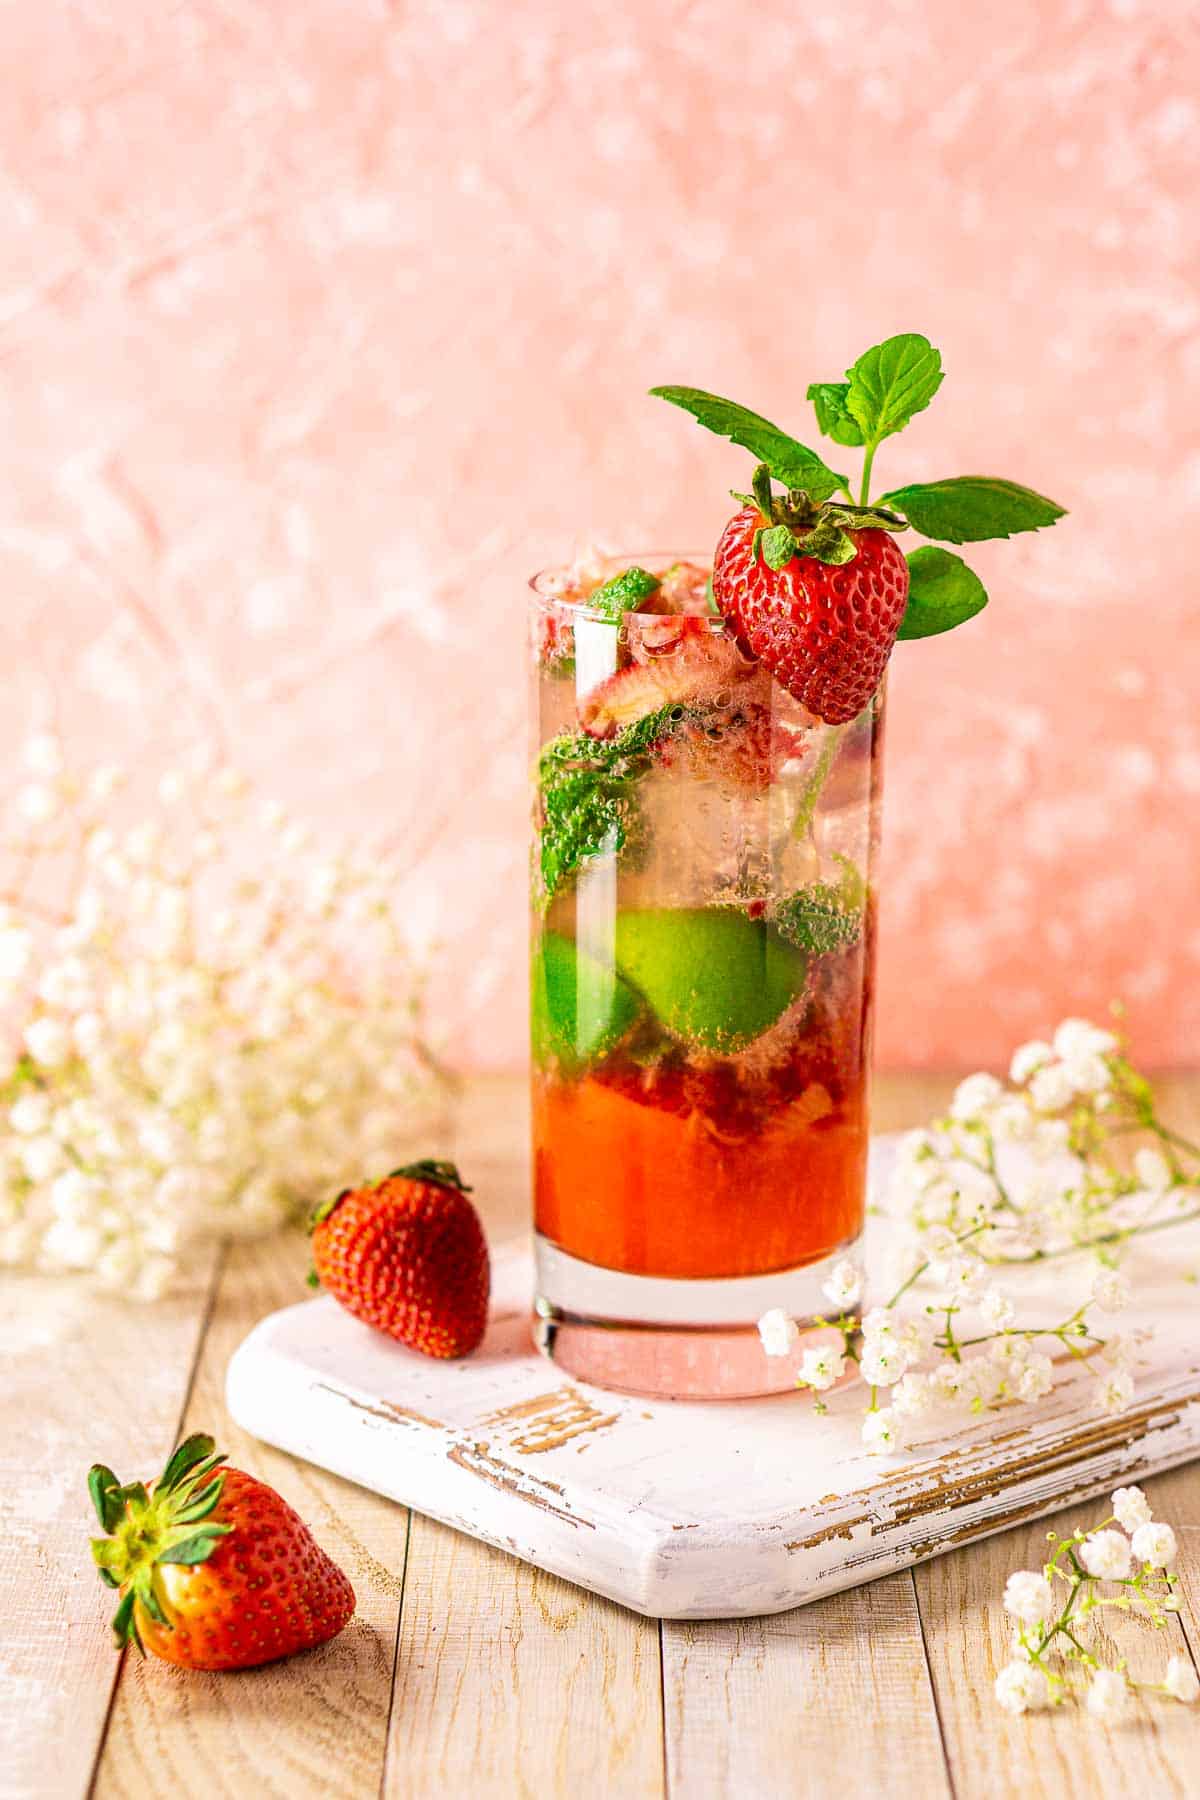 Looking at the strawberry mojito from the side on a white tray with berries and flowers around it.